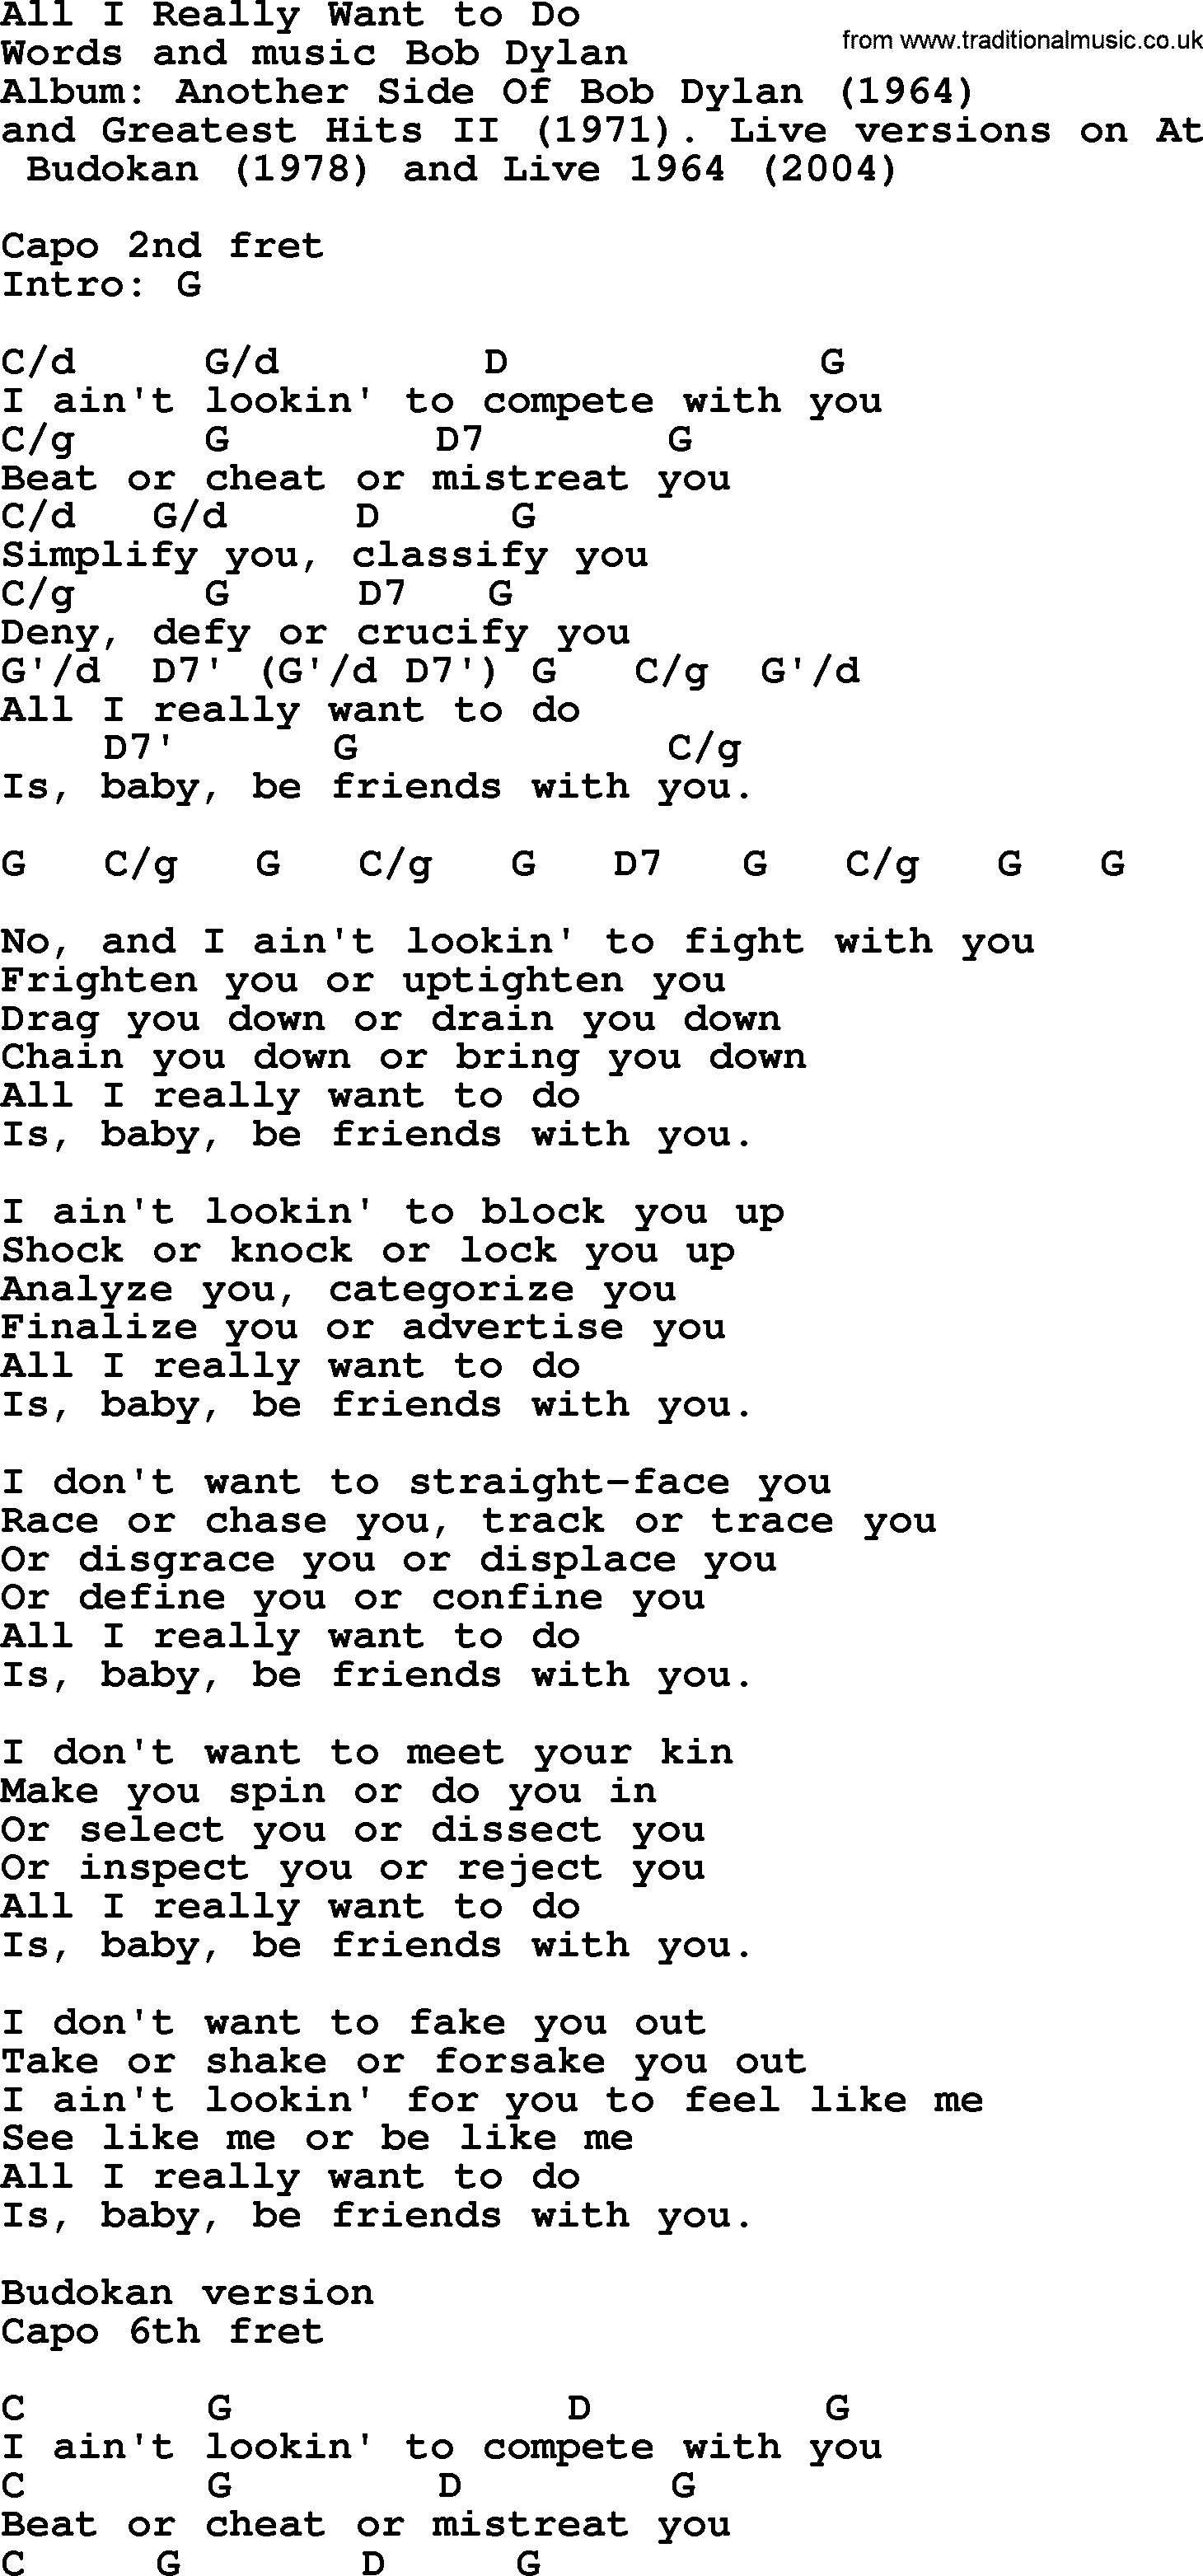 All I Want Chords Bob Dylan Song All I Really Want To Do Lyrics And Chords